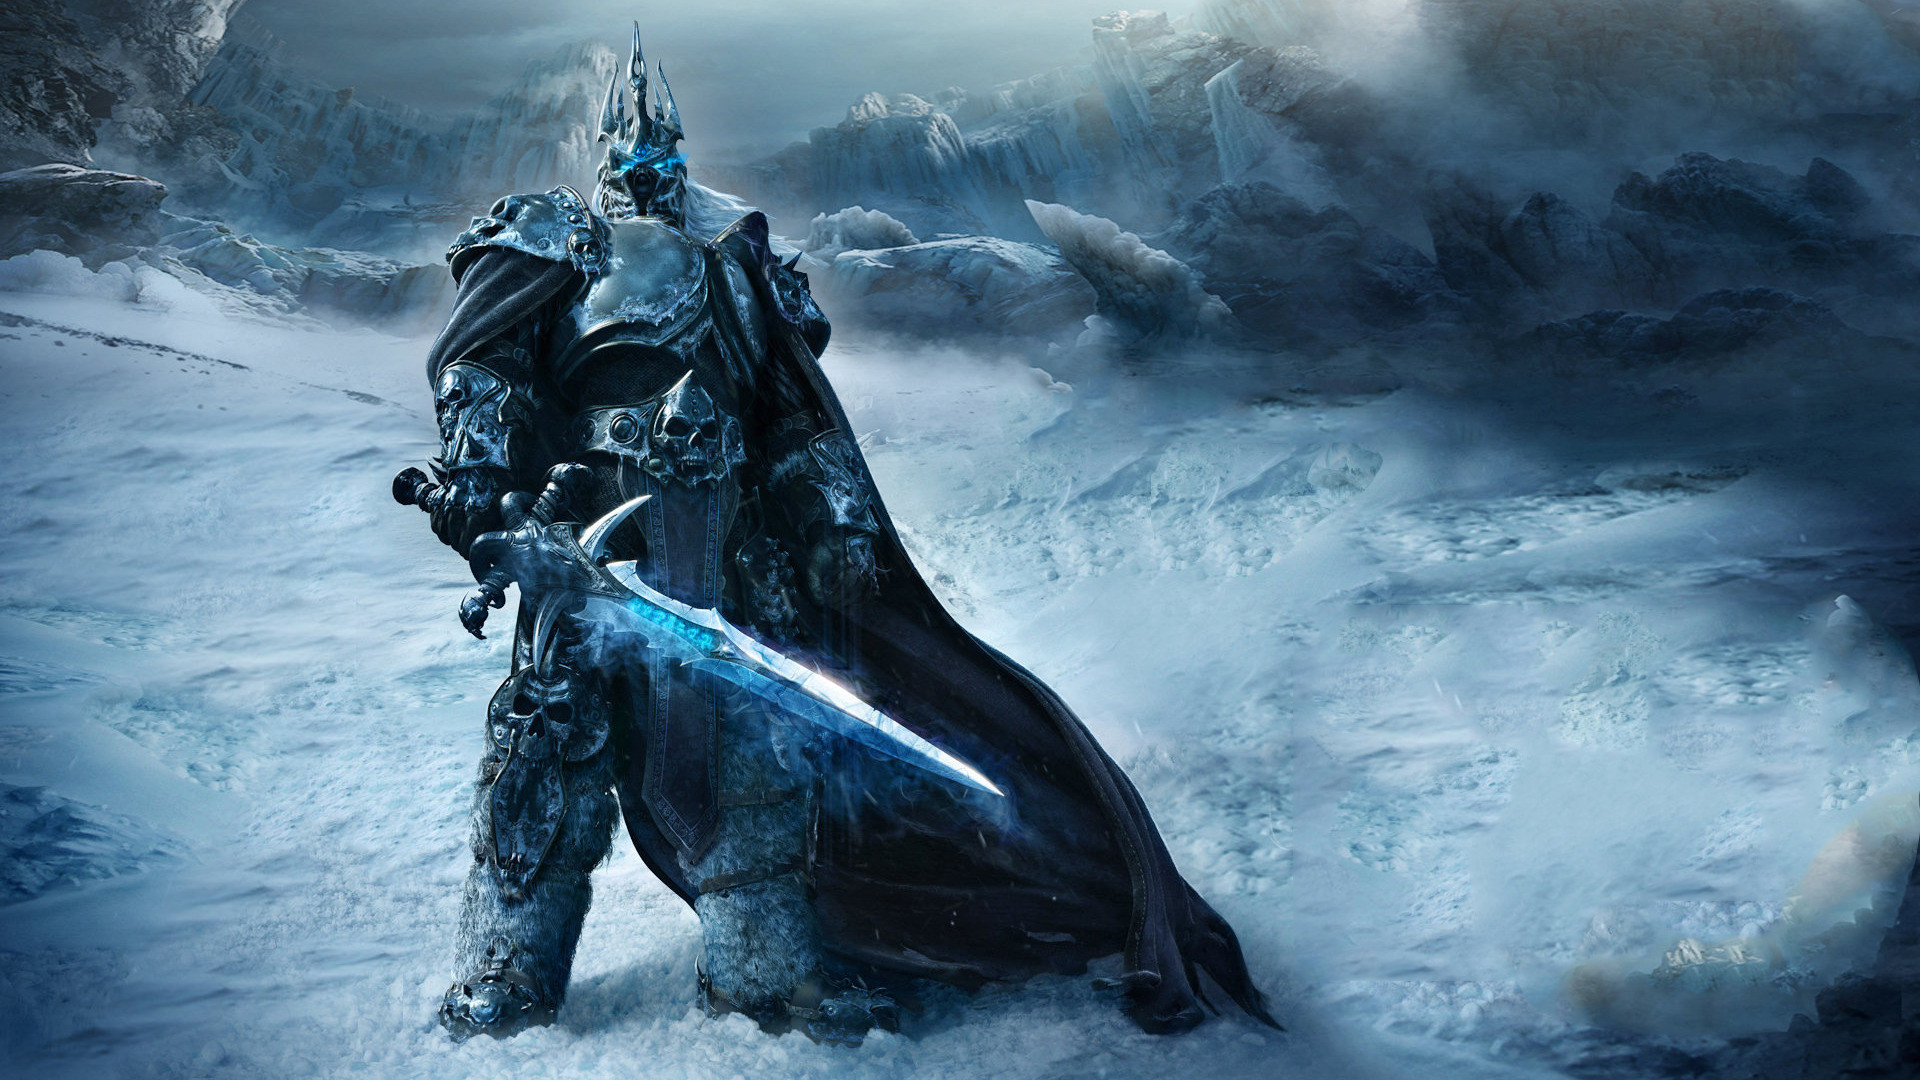 1920x1080 game world of warcraft wrath of the lich king wallpaper